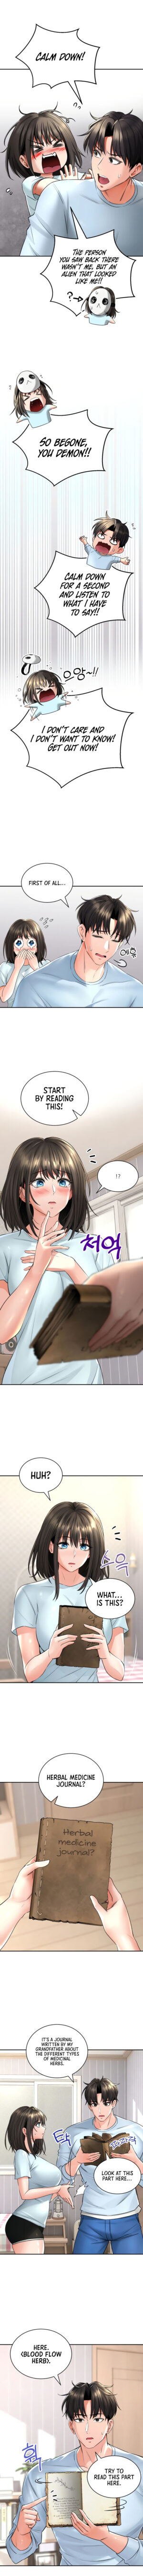 [Lee Juwon] Herbal Love Story (1-25) [English] [Omega Scans] [Ongoing]